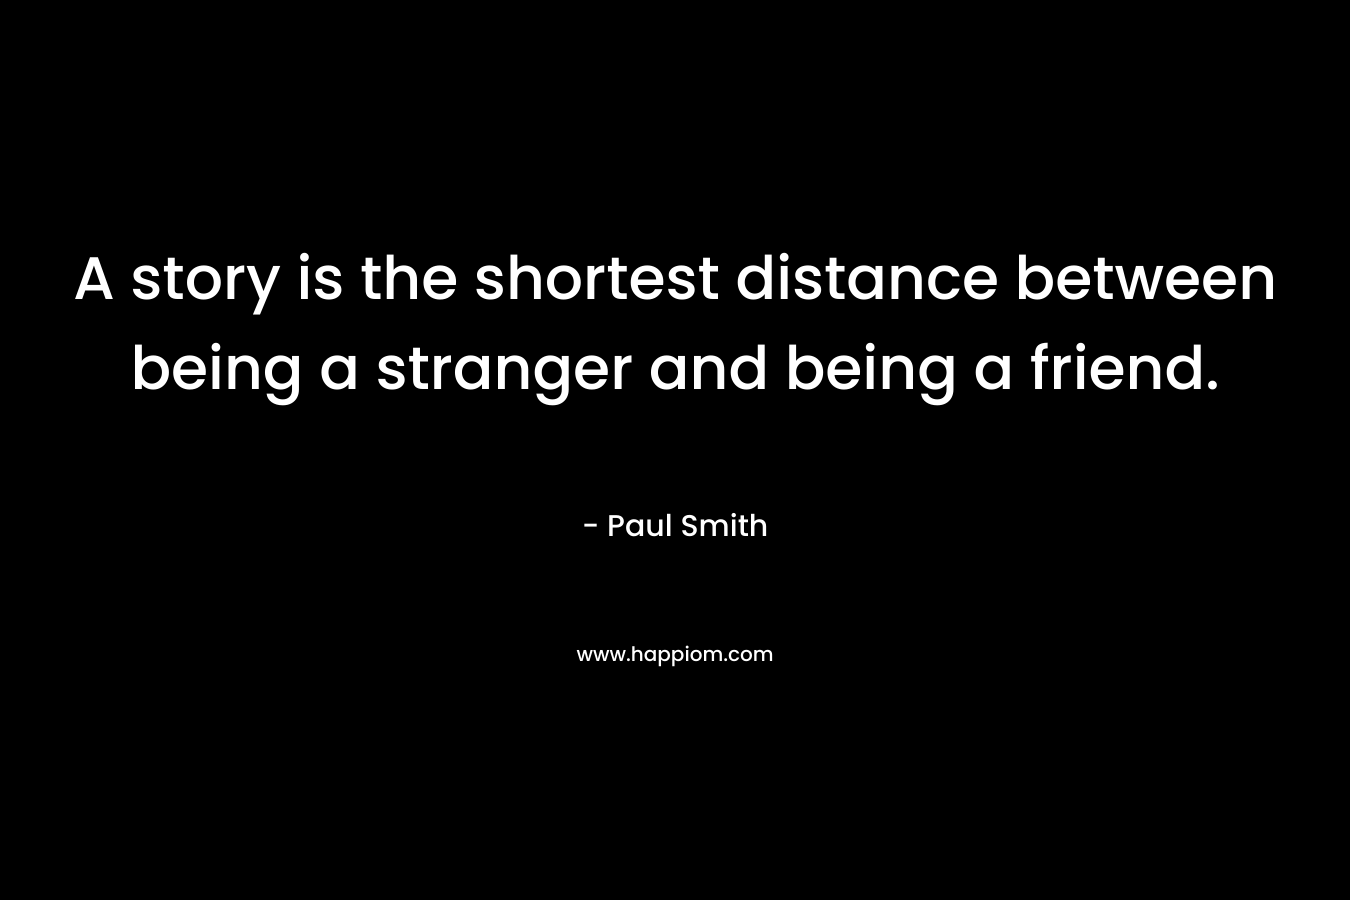 A story is the shortest distance between being a stranger and being a friend. – Paul Smith